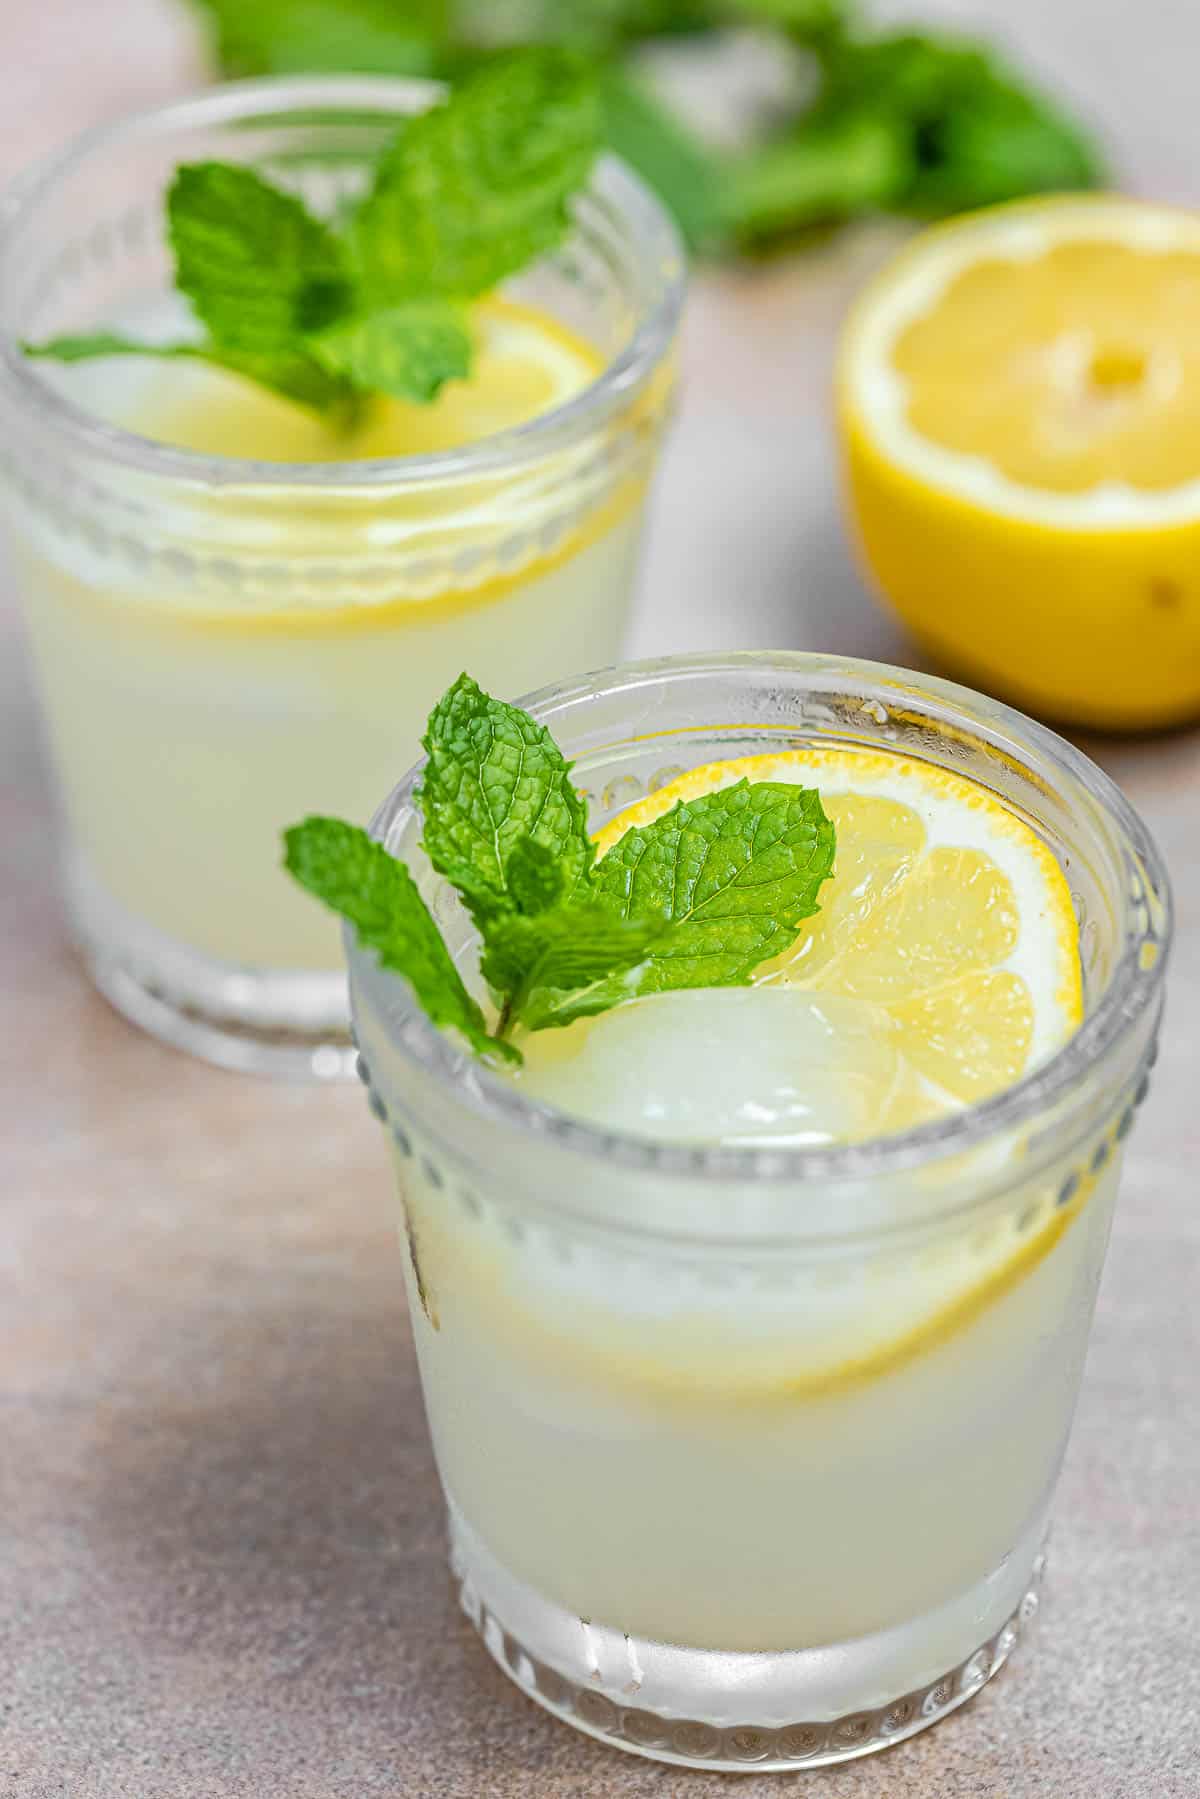 Easy Ouzo Drink with Lemon | The Mediterranean Dish